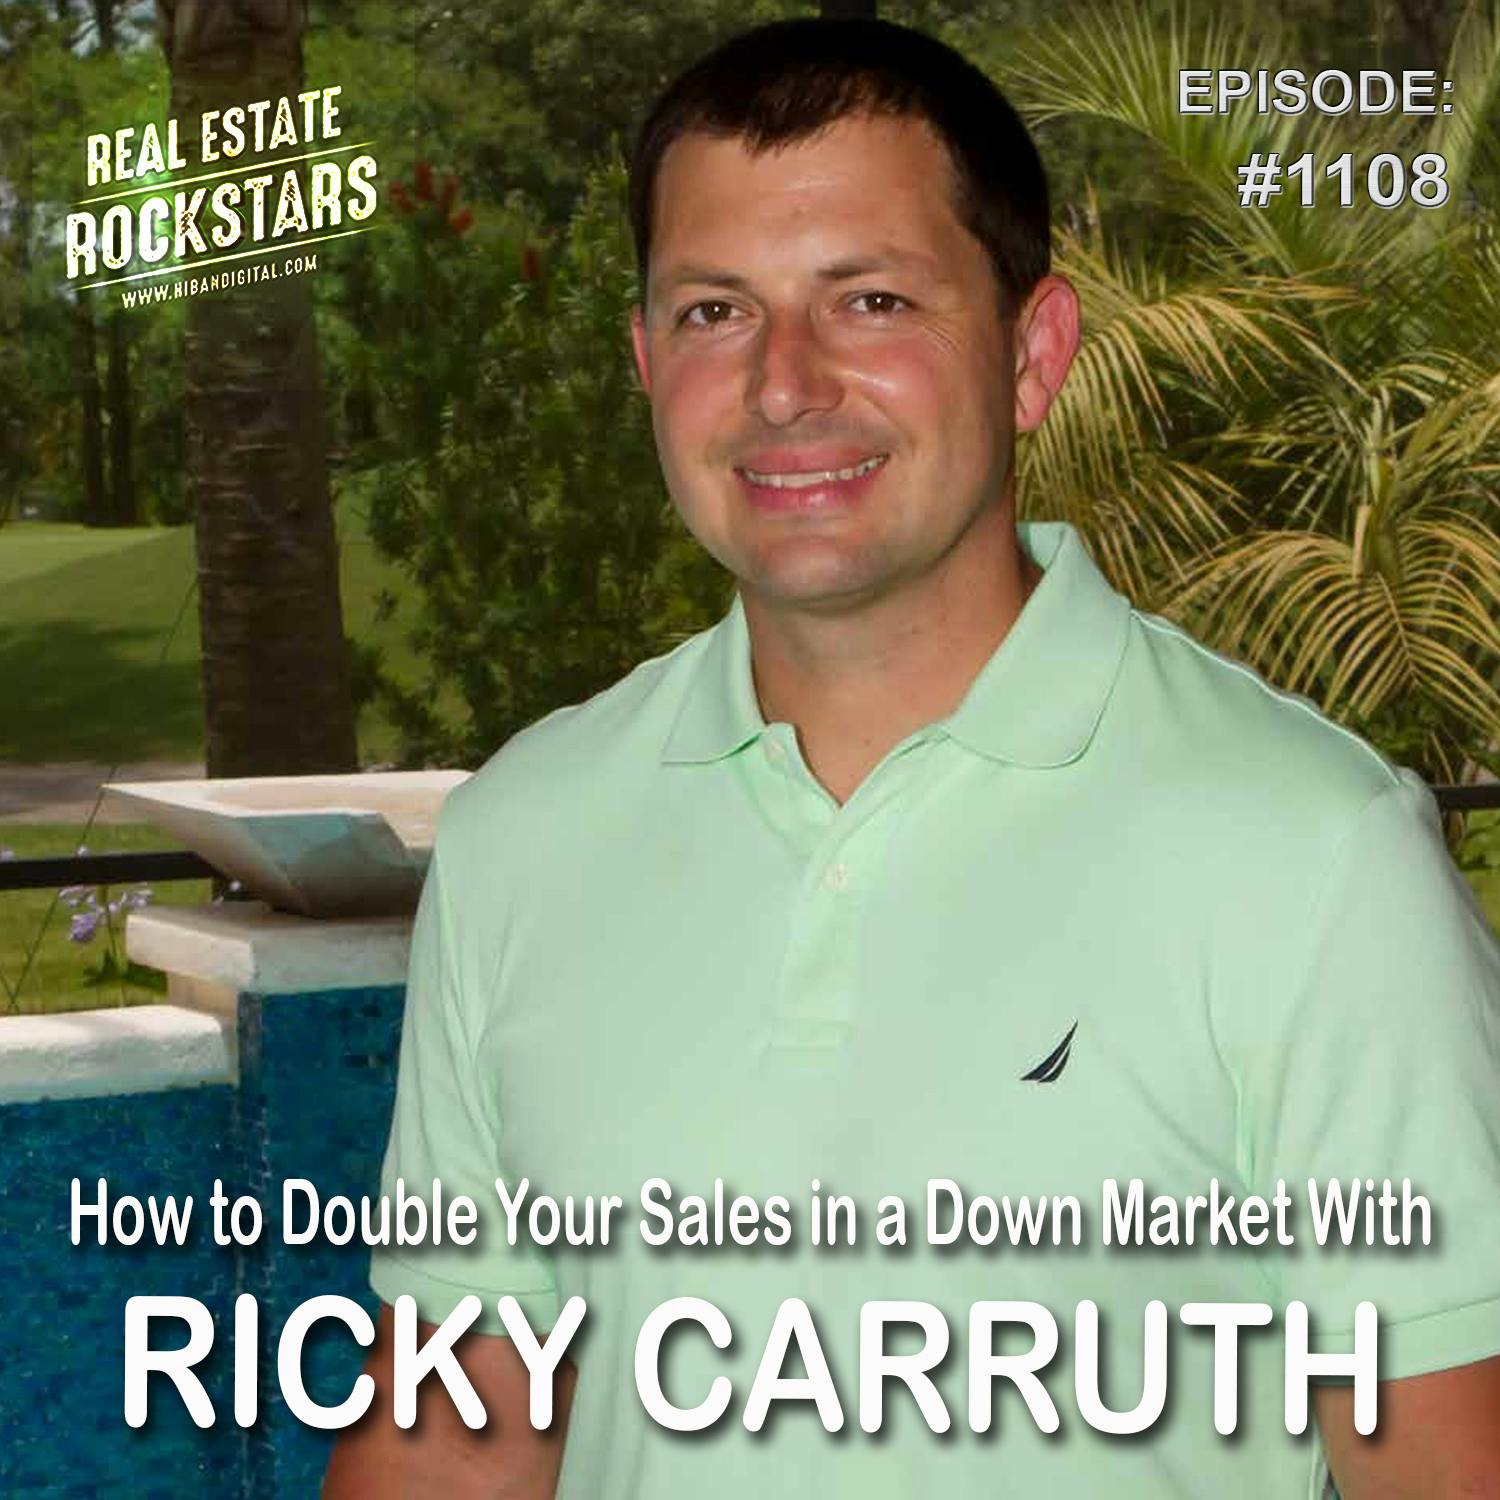 1108: How to Double Your Sales in a Down Market With Ricky Carruth